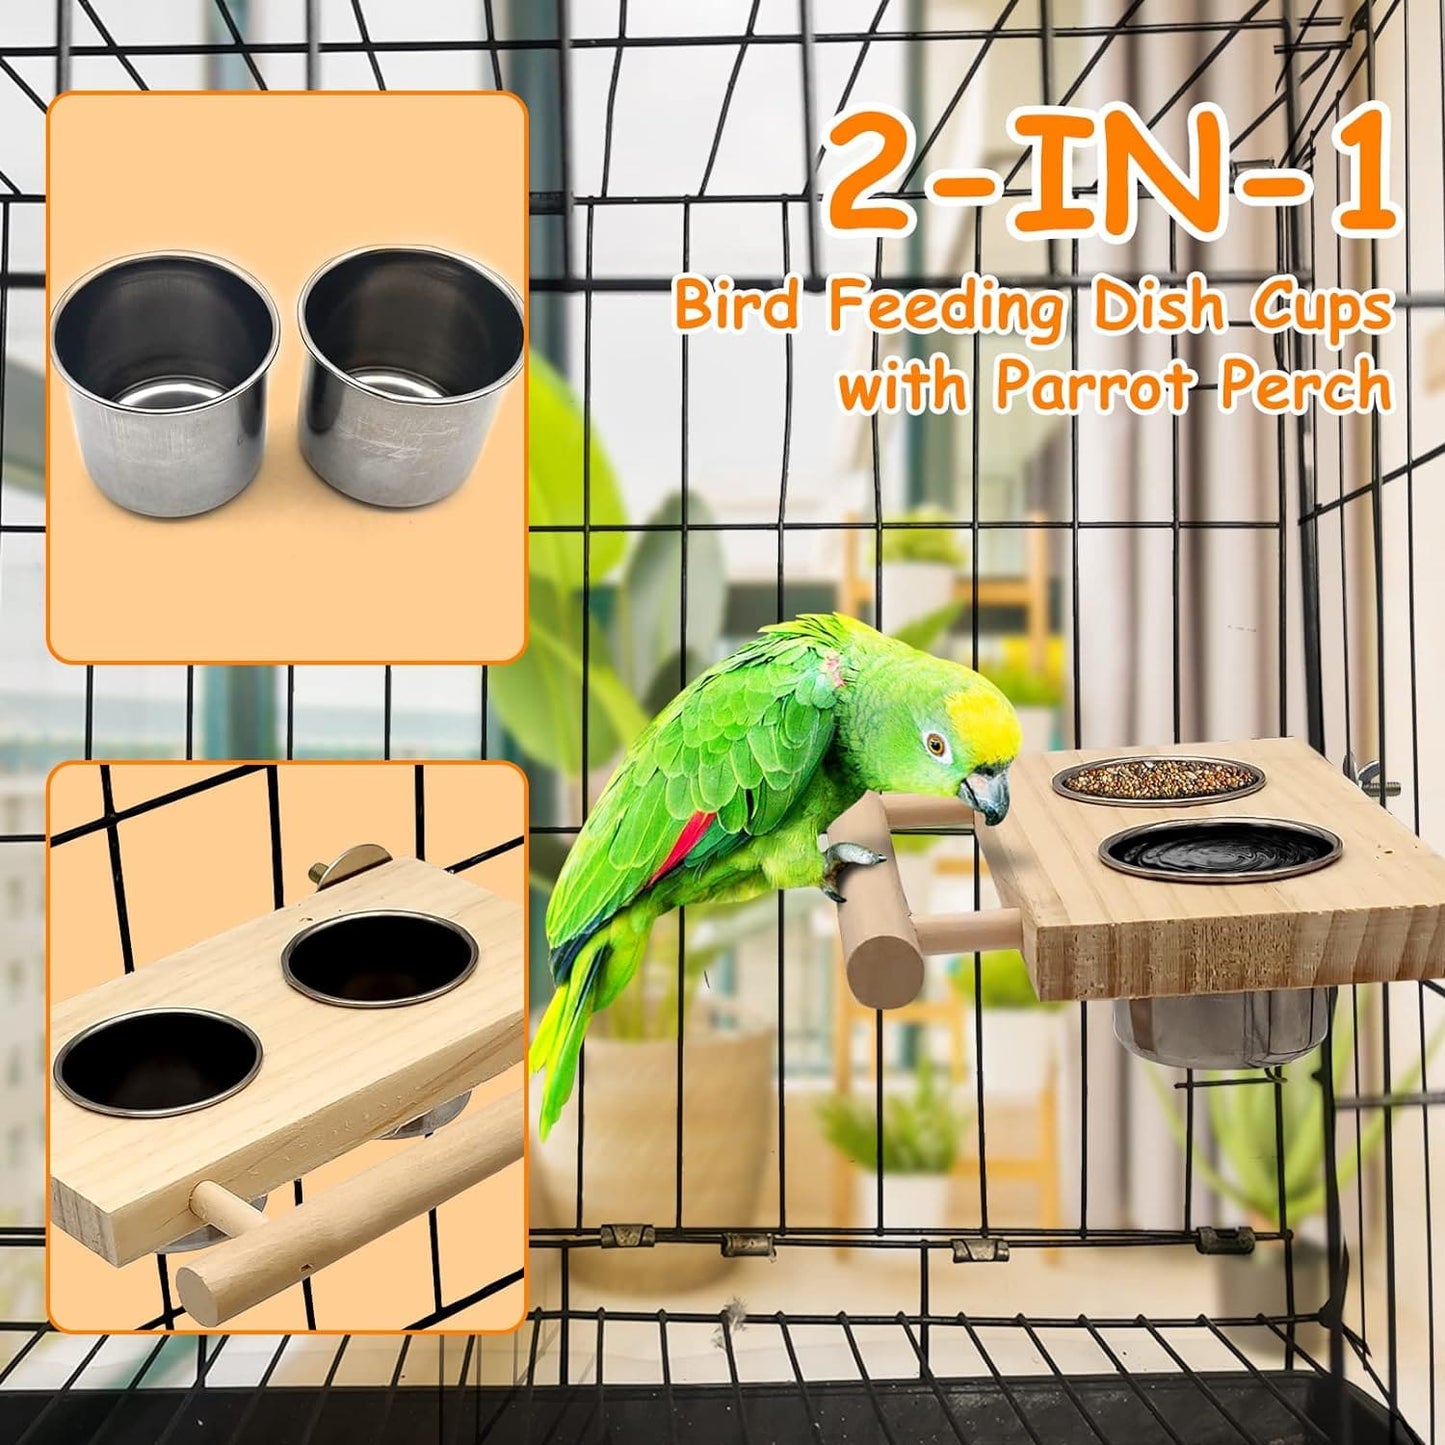 KUTKUT Bird Food & Water Stainless Steel Cups Wooden Perch Stand Hanging Feeder Bowls Feeding and Watering Supplies for Parakeets Conures Cockatiels Budgie Parrot-feeding essentials-kutkutstyle